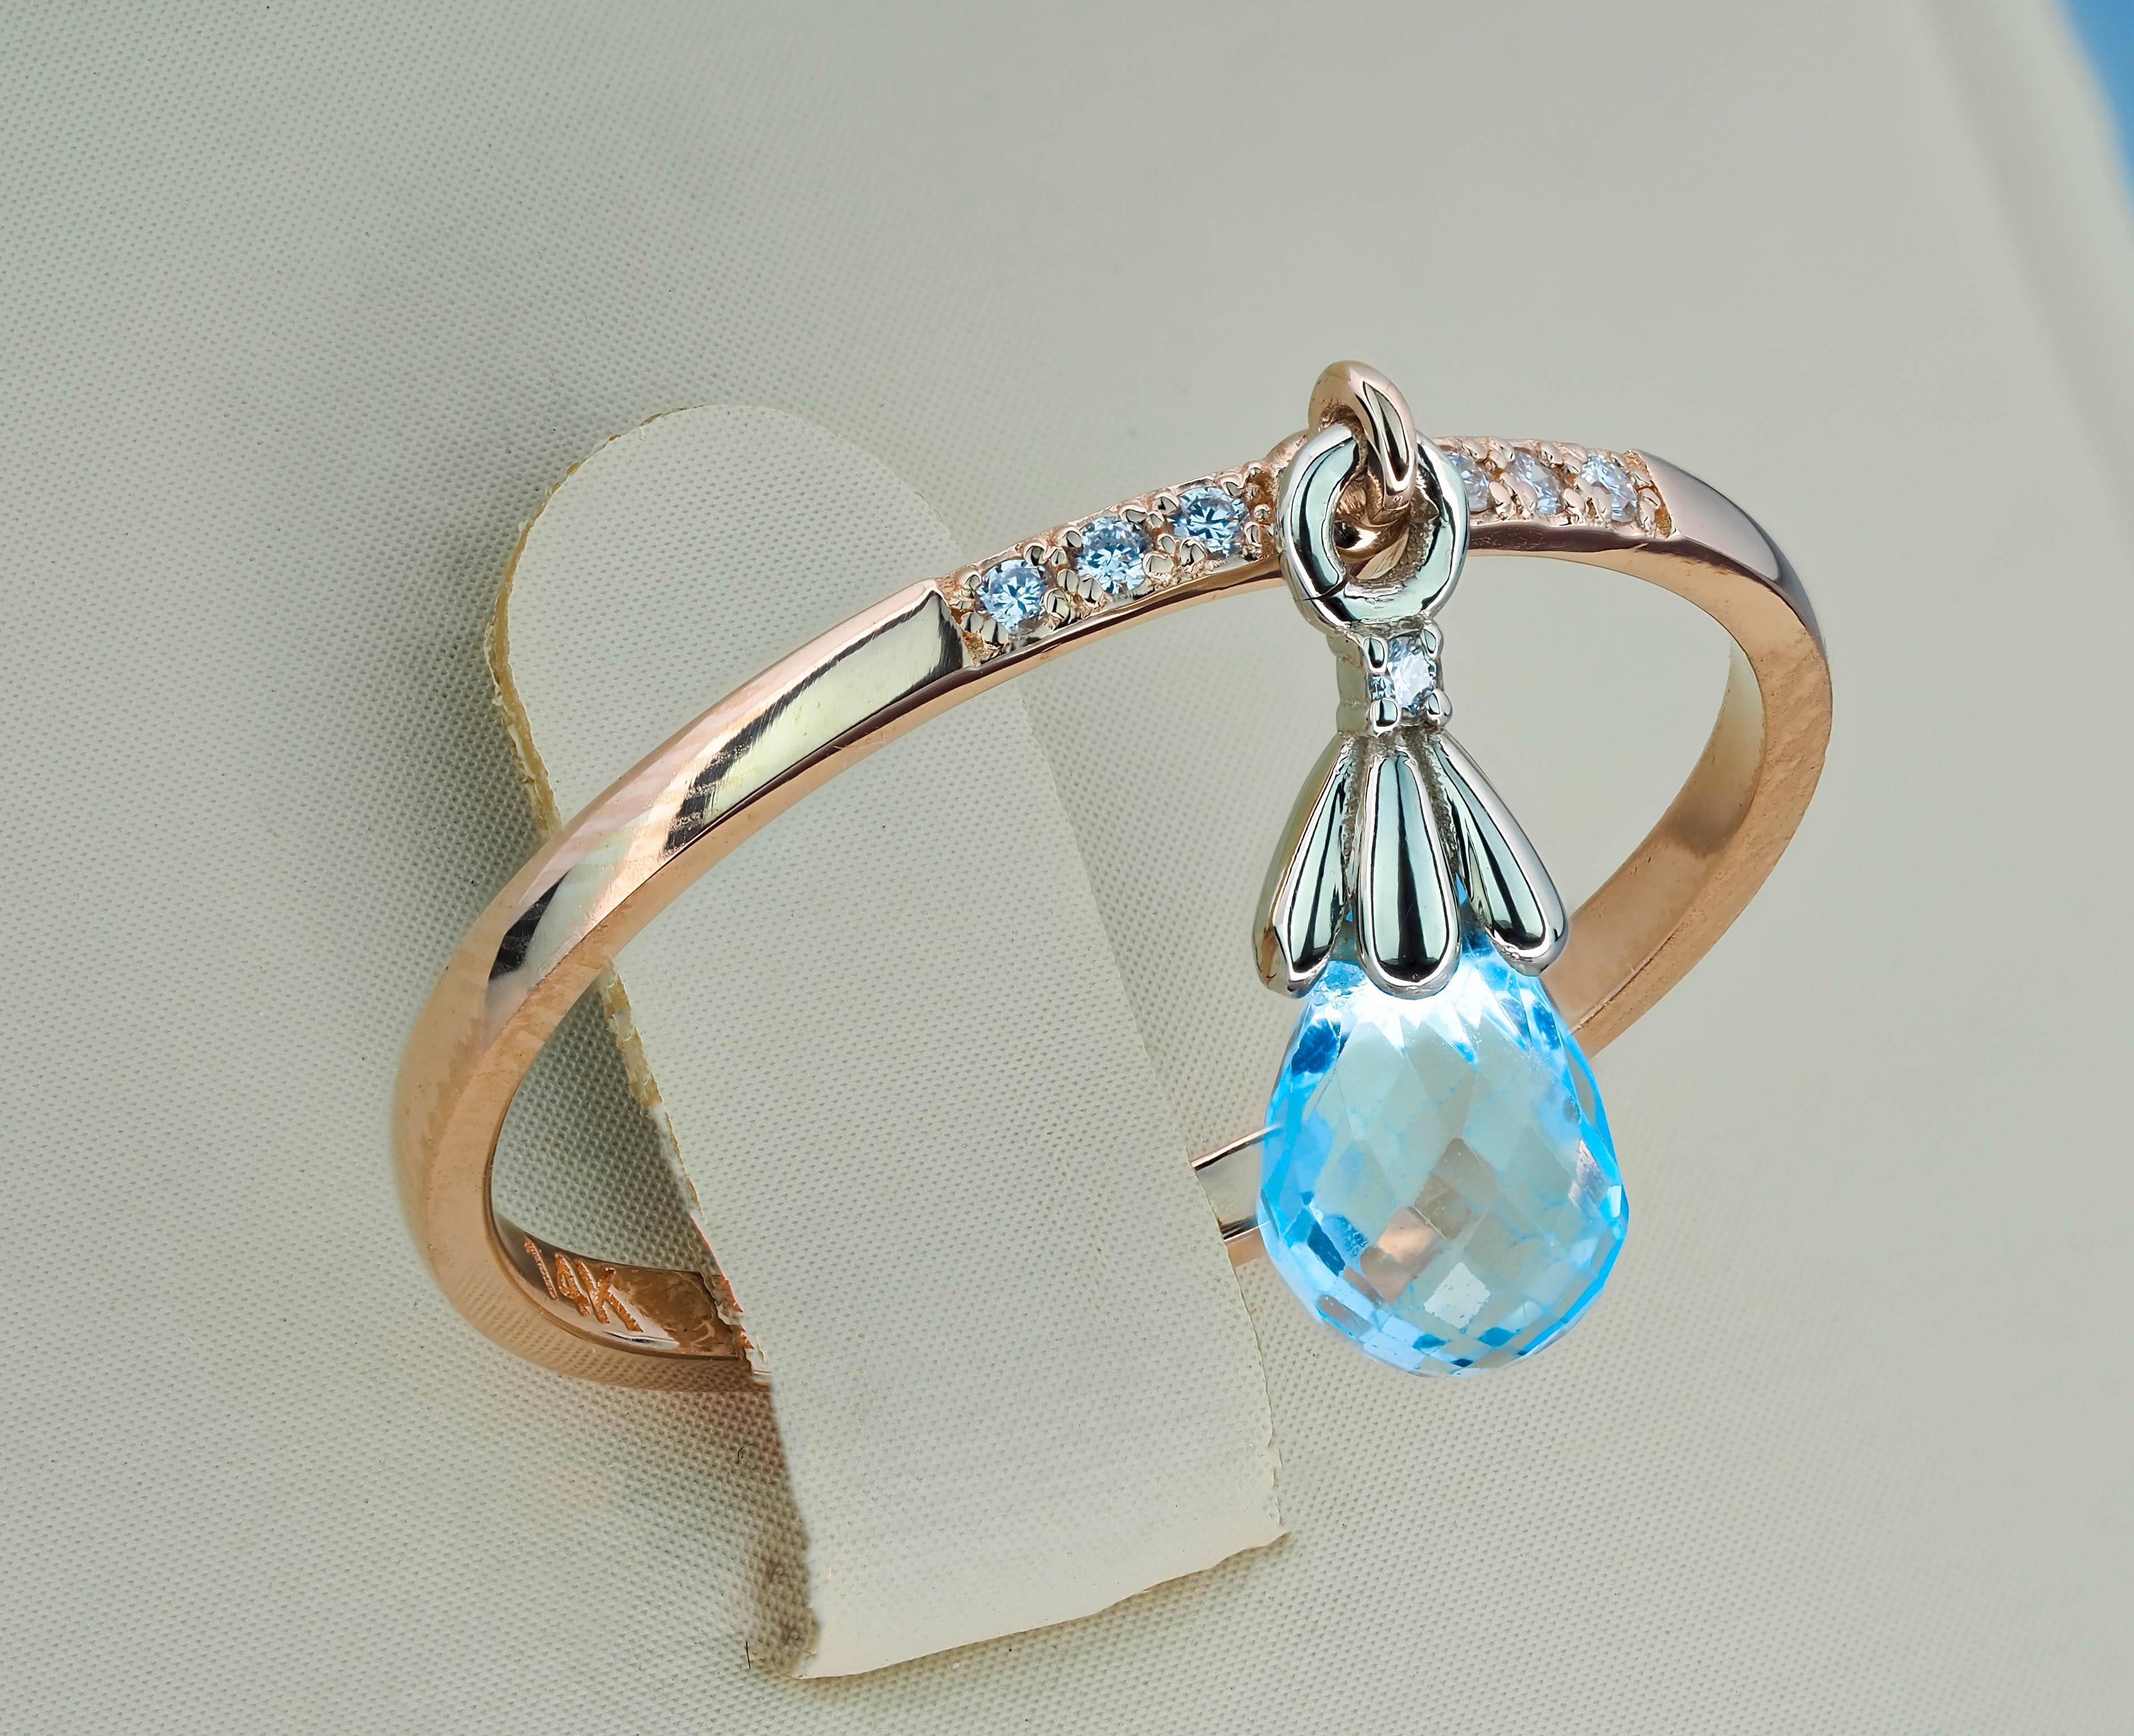 For Sale:  14k Gold Ring with Topaz Briolette and Diamonds 5